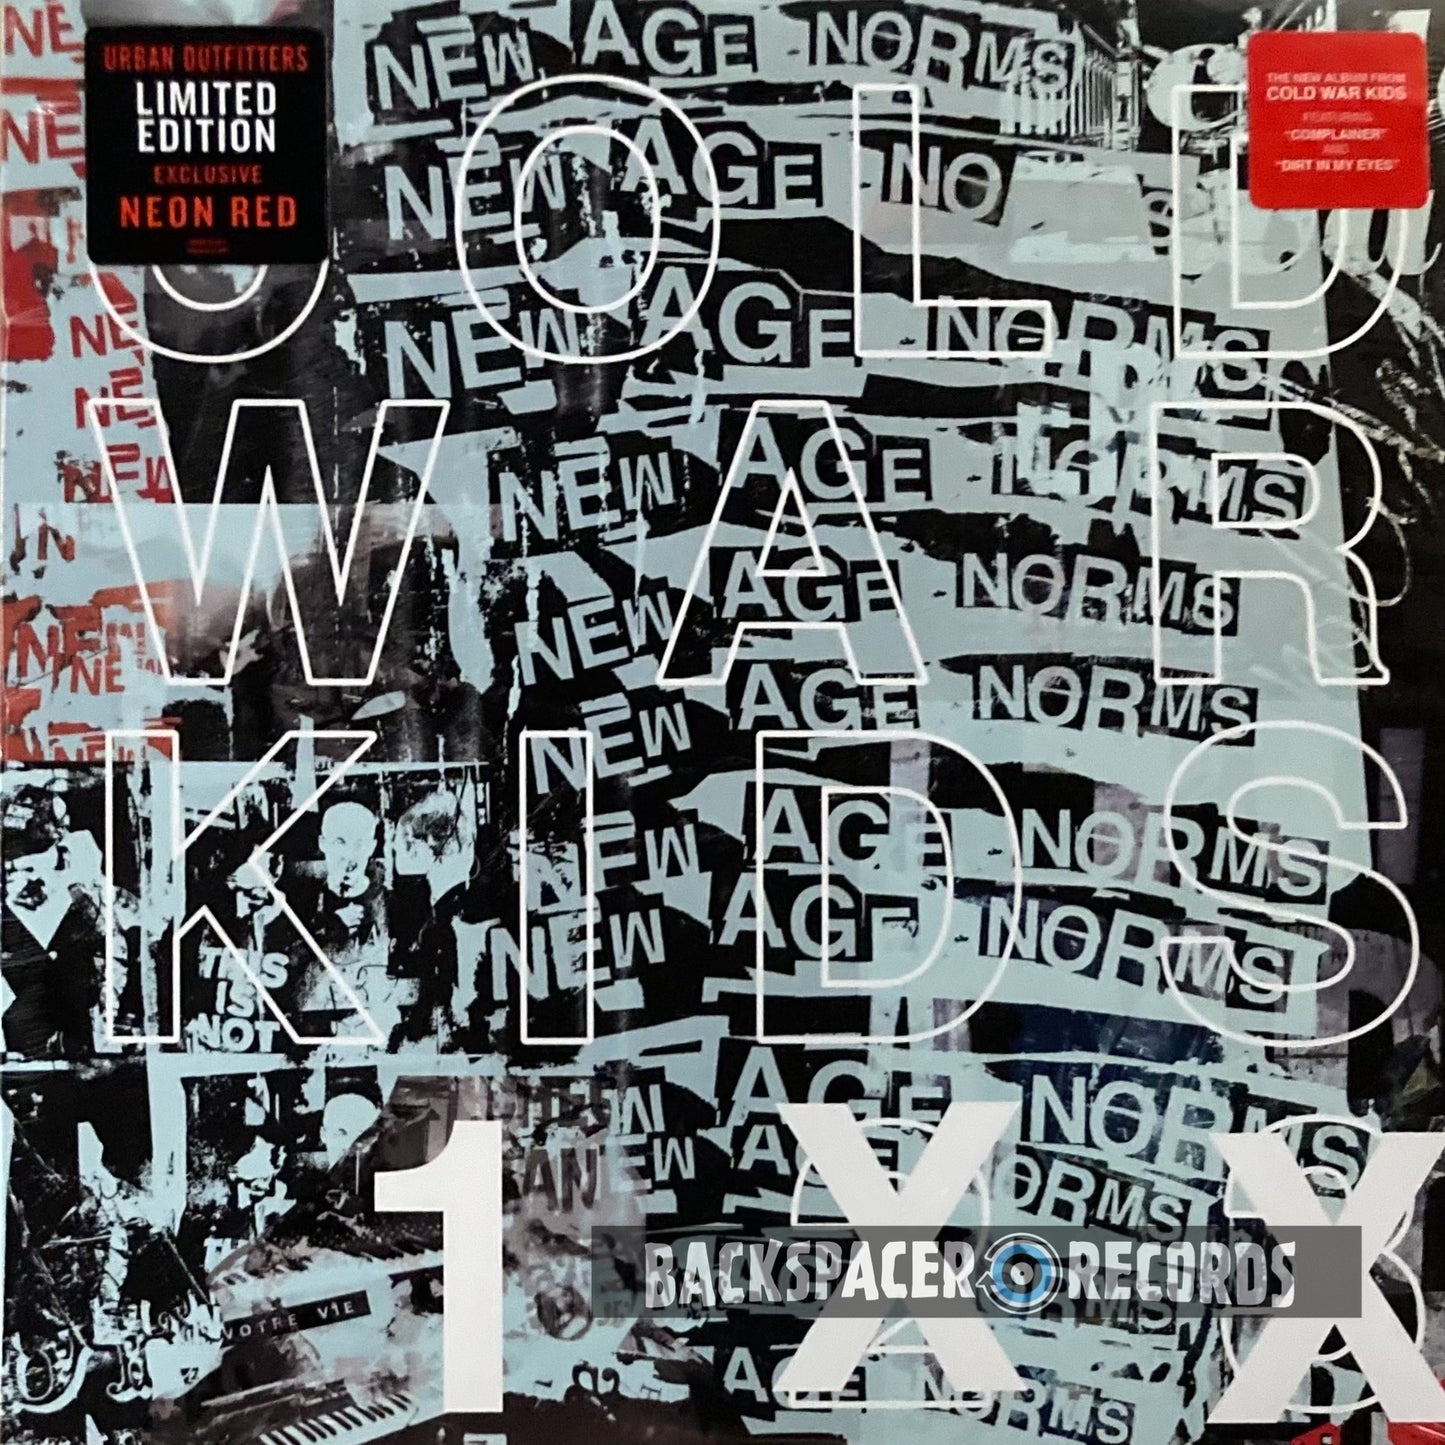 Cold War Kids ‎– New Age Norms 1 (Limited Edition) LP (Sealed)